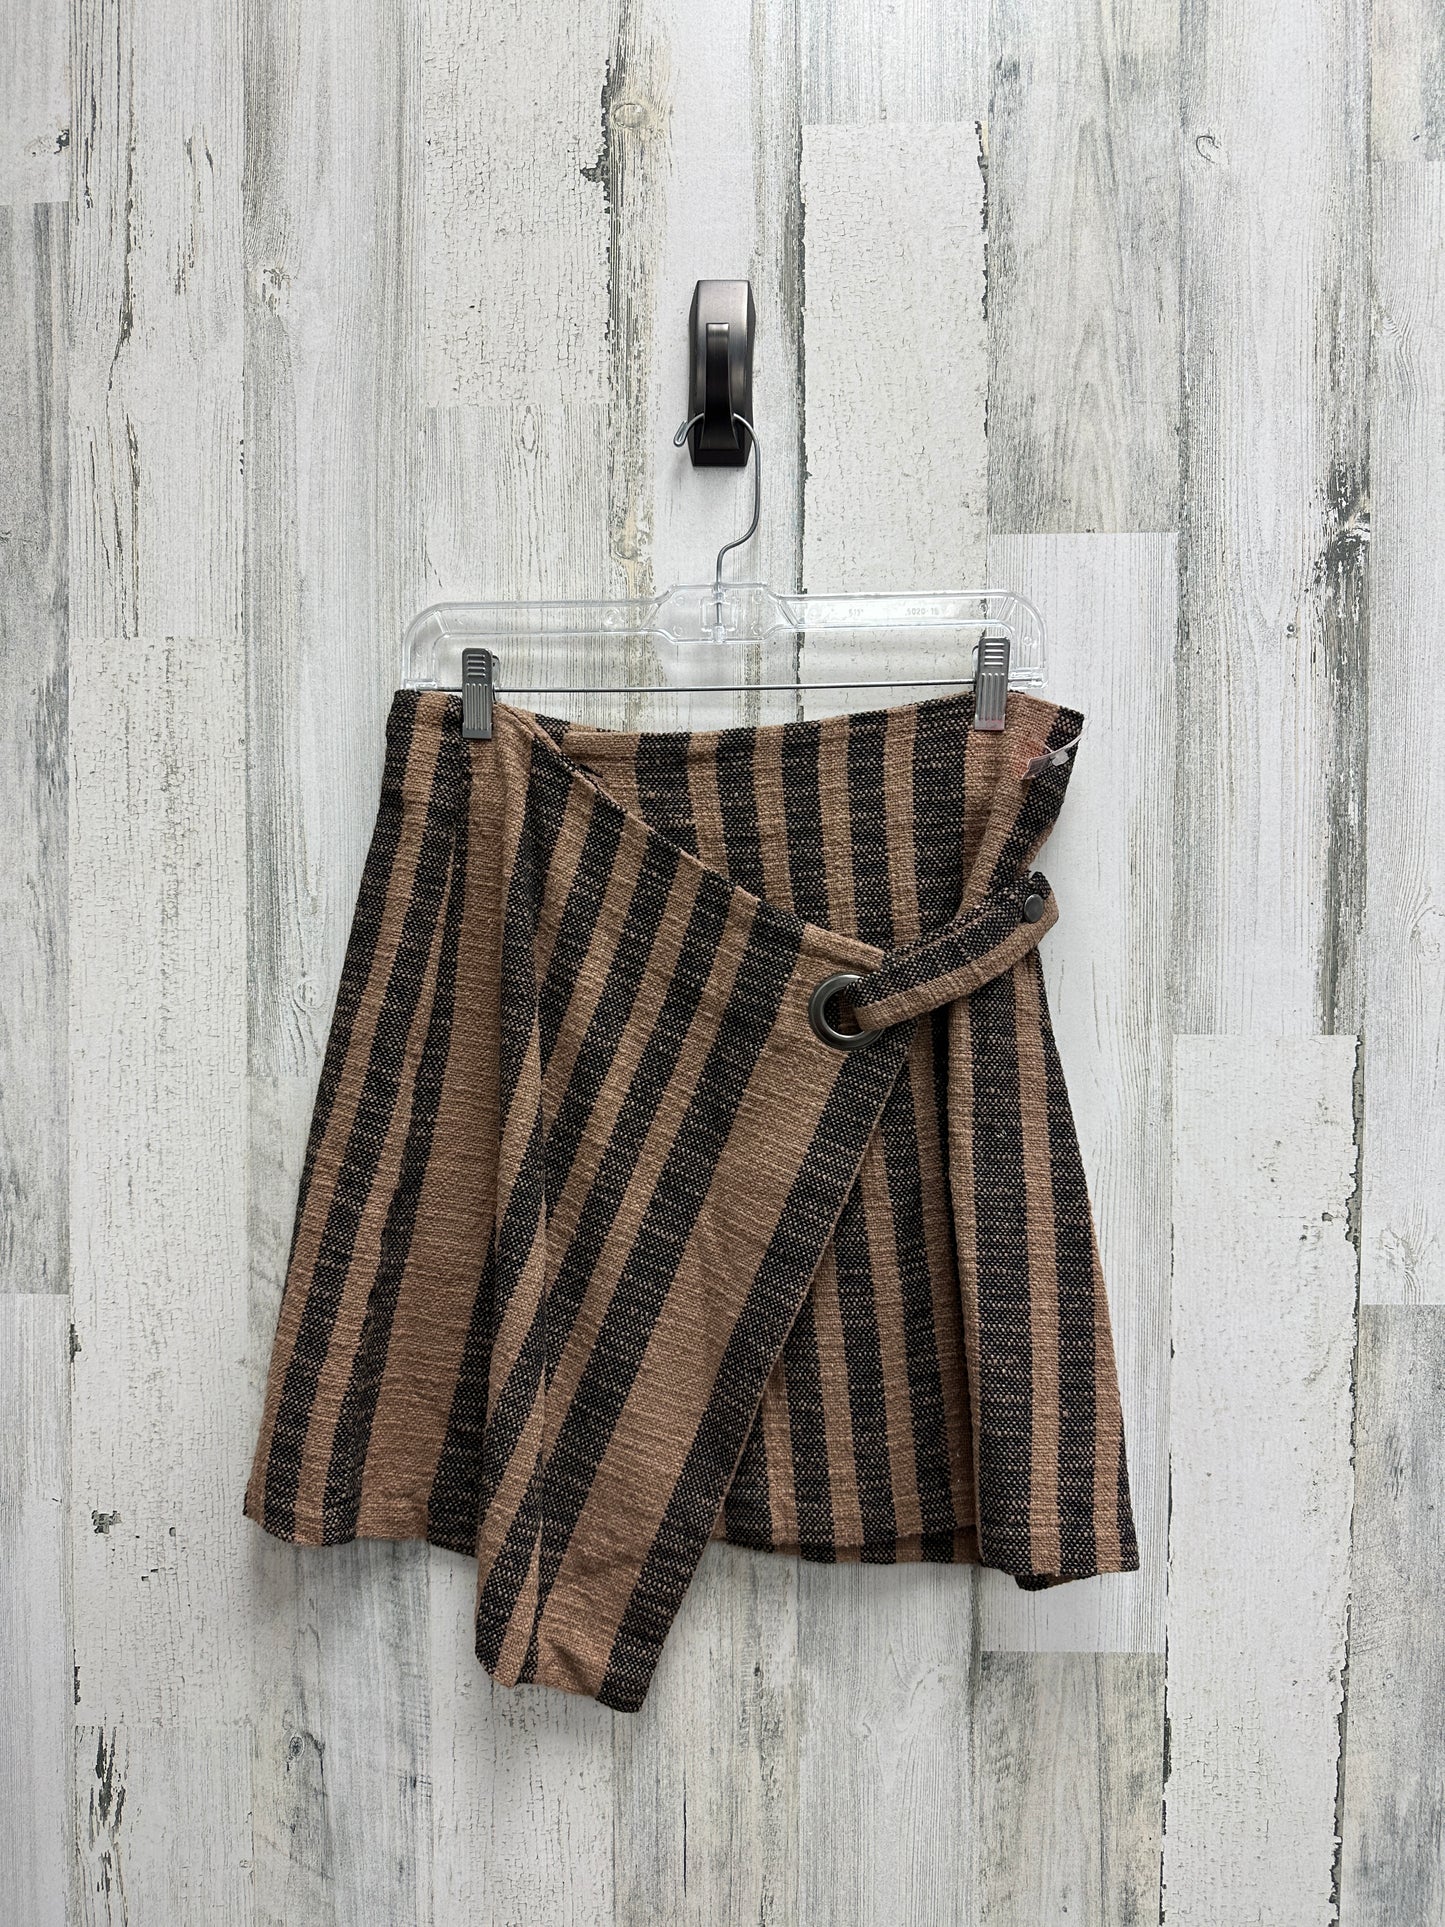 Skirt Mini & Short By Free People  Size: M